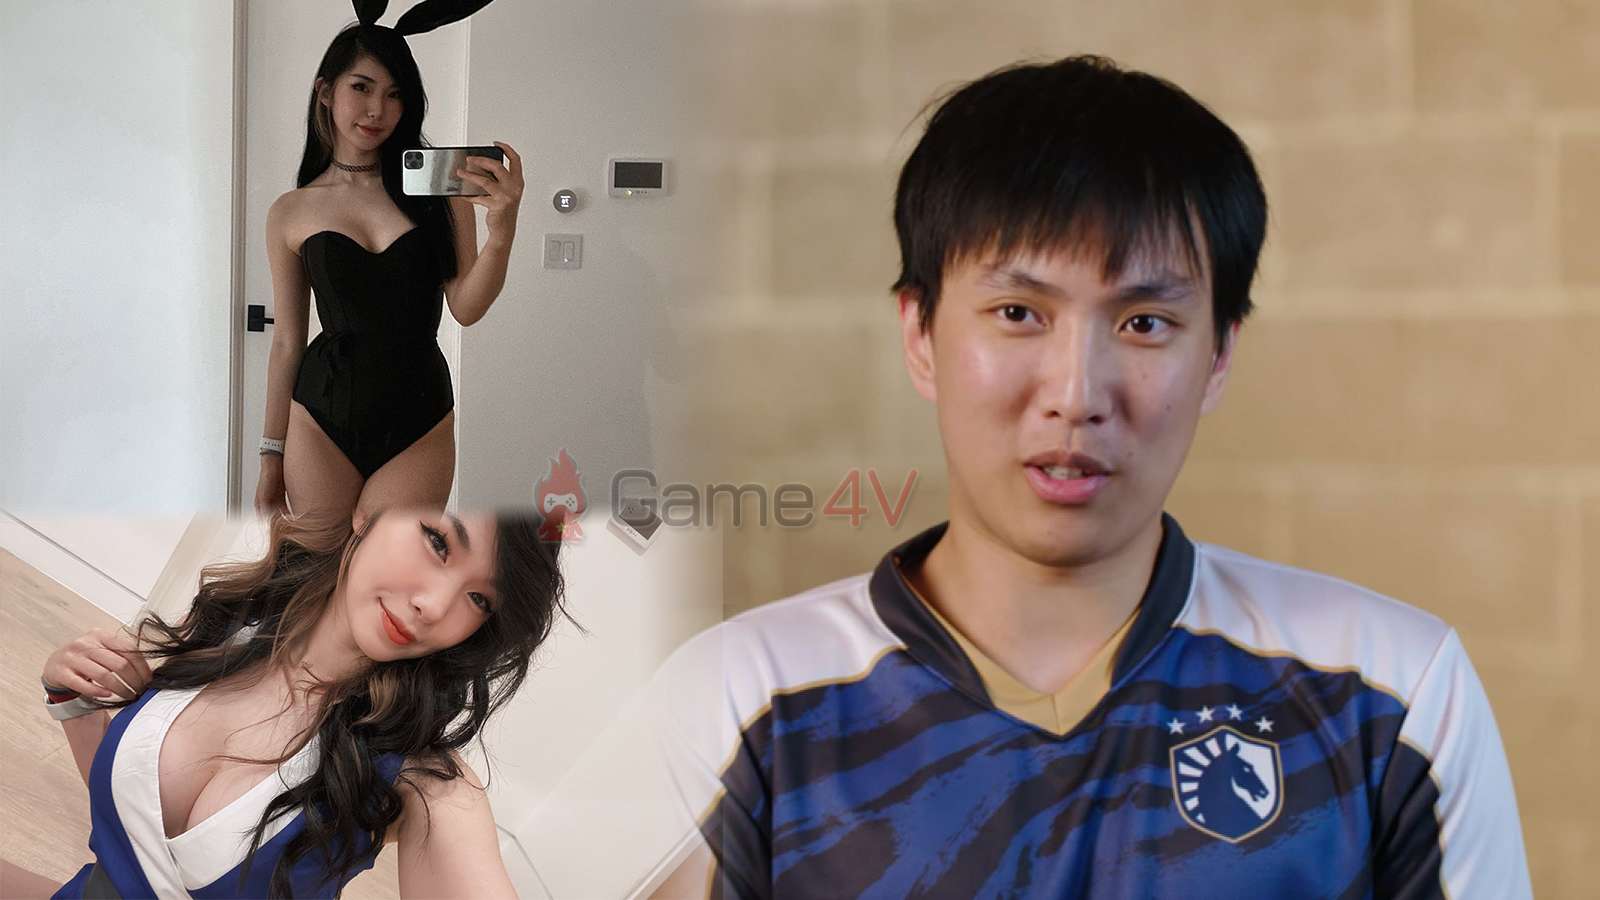 Doublelift was confused when his girlfriend suddenly created an account on a paid platform